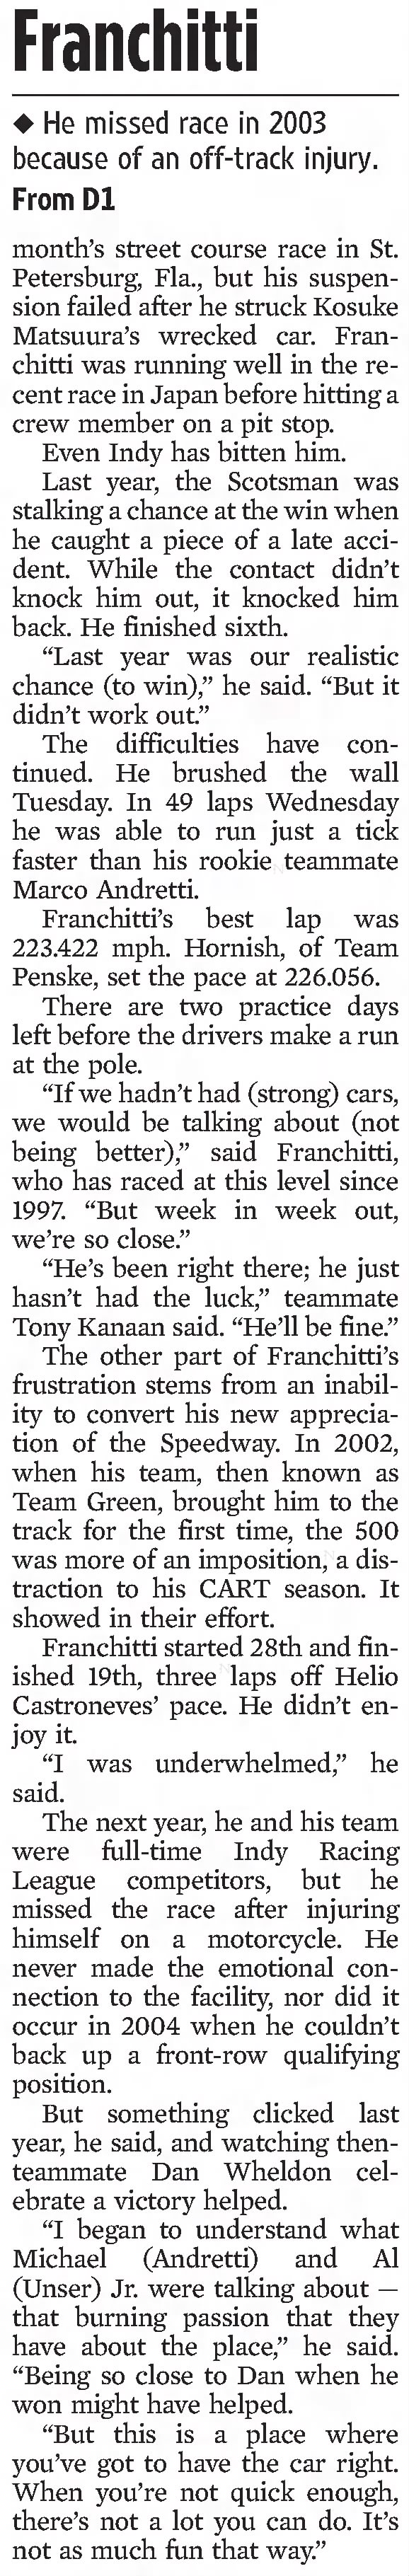 Franchitti 2006 Frustration - The Indianapolis Star - Page D10 - 11 May 2006